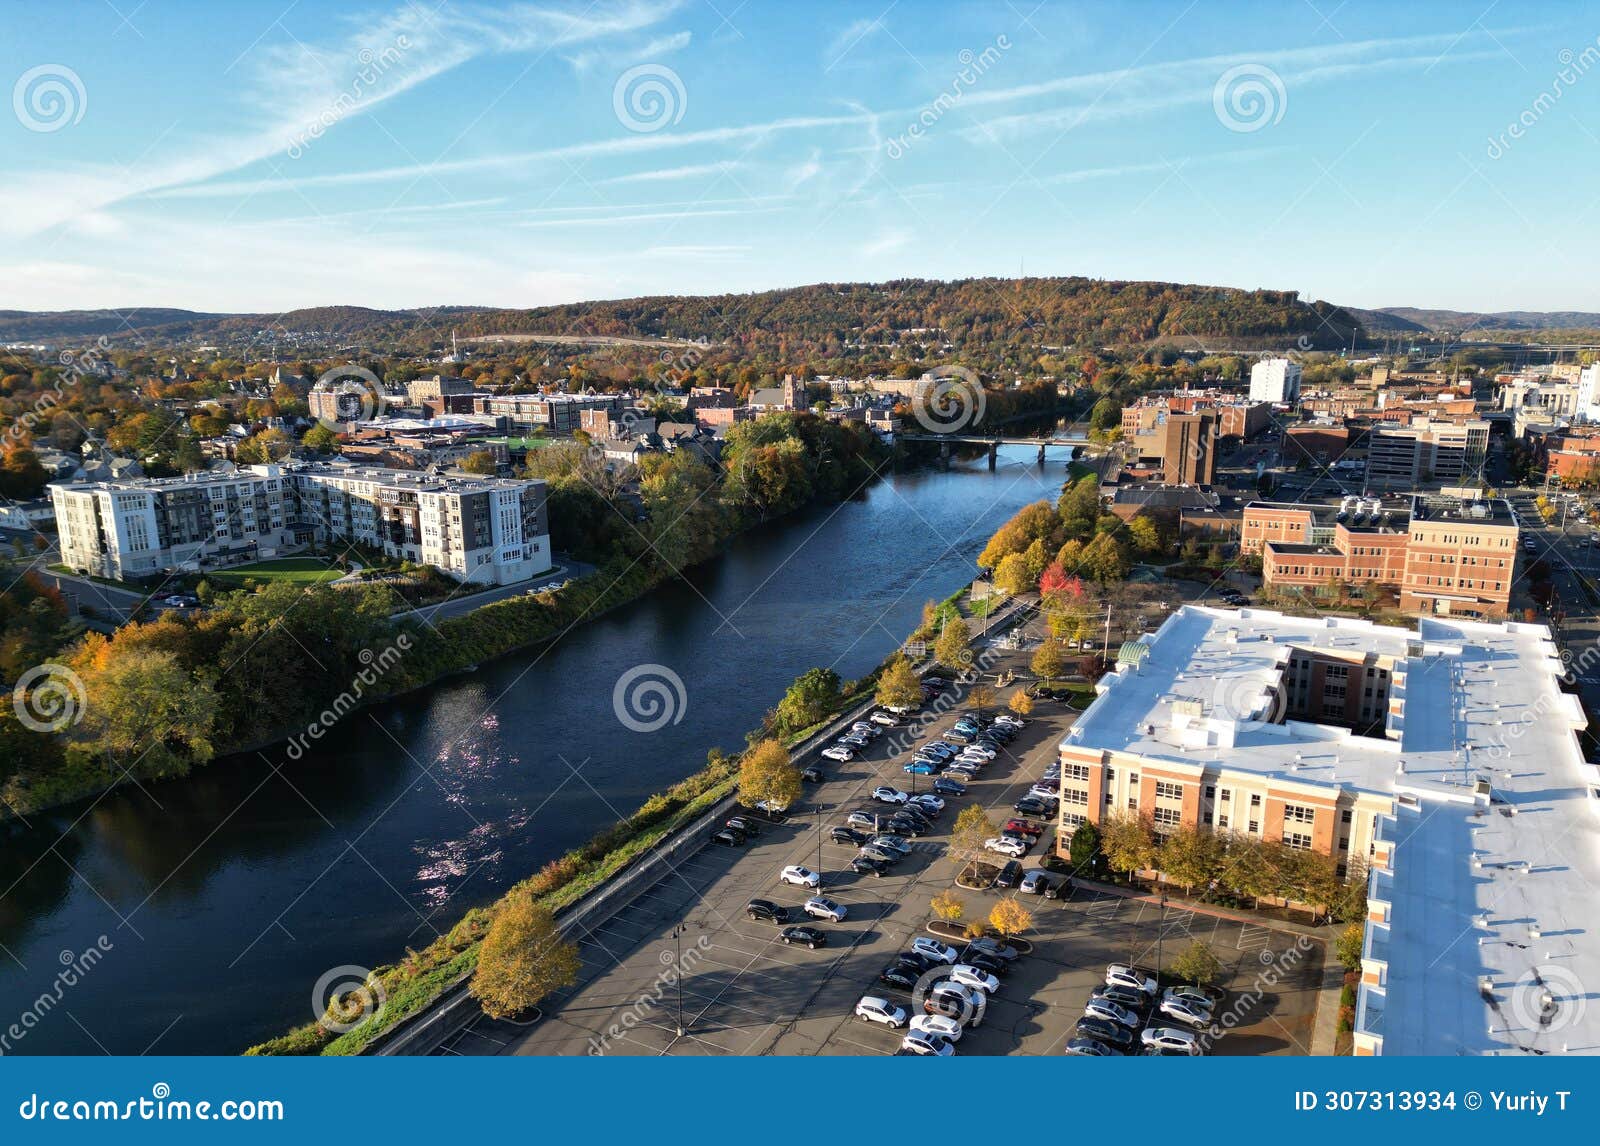 view of chenango river in downtown bighamton new york (southern tier, small town usa) aerial view from above